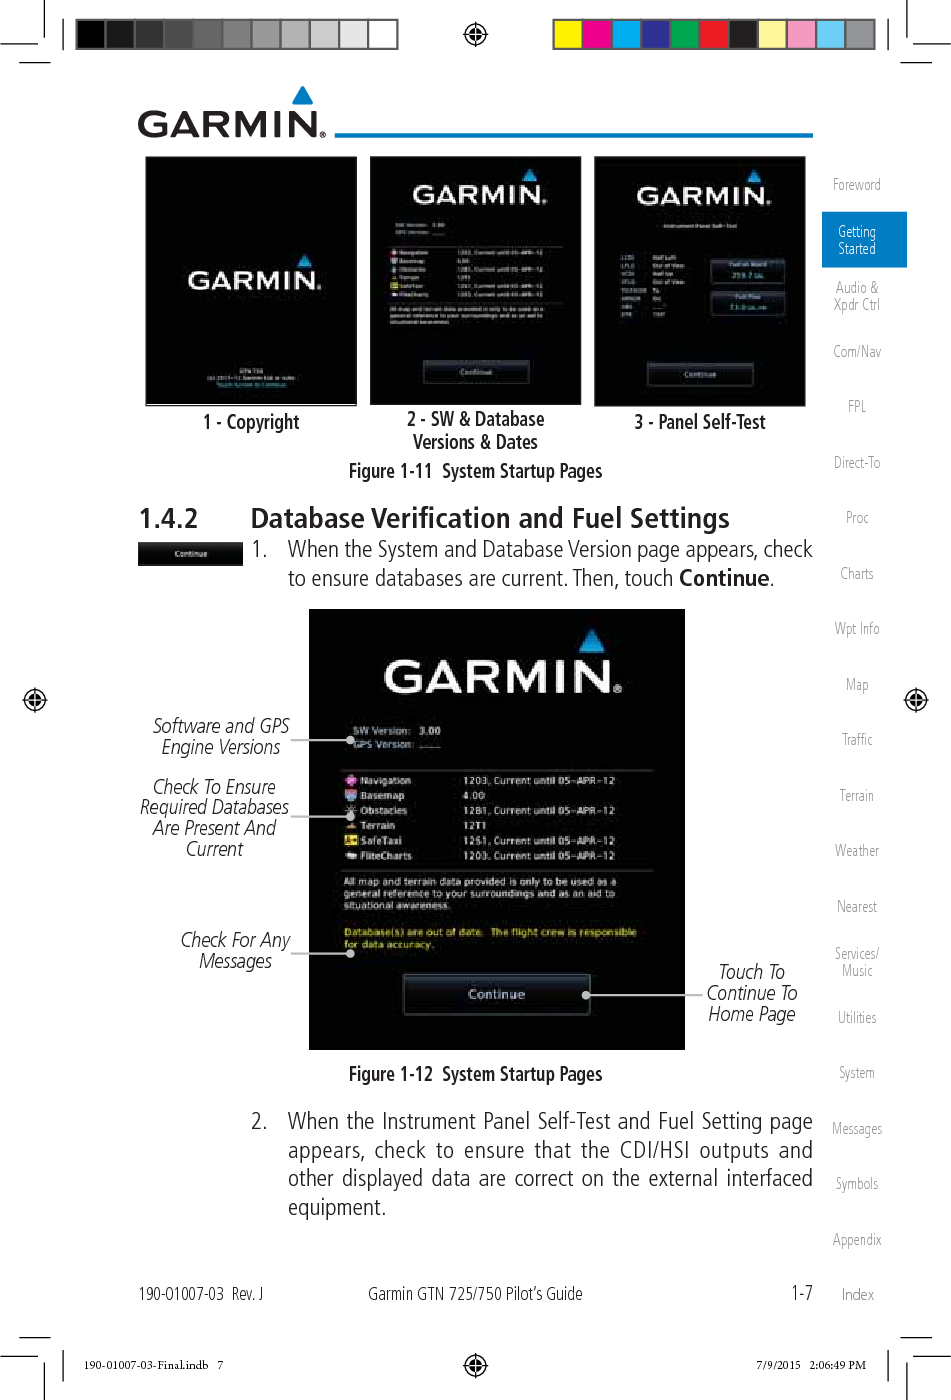 1-7190-01007-03  Rev. JGarmin GTN 725/750 Pilot’s GuideForewordGetting StartedAudio &amp;  Xpdr CtrlCom/NavFPLDirect-ToProcChartsWpt InfoMapTrafﬁcTerrainWeatherNearestServices/MusicUtilitiesSystemMessagesSymbolsAppendixIndex1 - Copyright 2 - SW &amp; Database  Versions &amp; Dates 3 - Panel Self-TestFigure 1-11  System Startup Pages1.4.2  Database Veriﬁcation and Fuel Settings 1.  When the System and Database Version page appears, check to ensure databases are current. Then, touch Continue. Check To Ensure Required Databases Are Present And CurrentTouch To Continue To Home PageSoftware and GPS Engine VersionsCheck For Any MessagesFigure 1-12  System Startup Pages  2.  When the Instrument Panel Self-Test and Fuel Setting page appears, check to ensure that the CDI/HSI outputs and other displayed data are correct on the external interfaced equipment. 190-01007-03-Final.indb   7 7/9/2015   2:06:49 PM